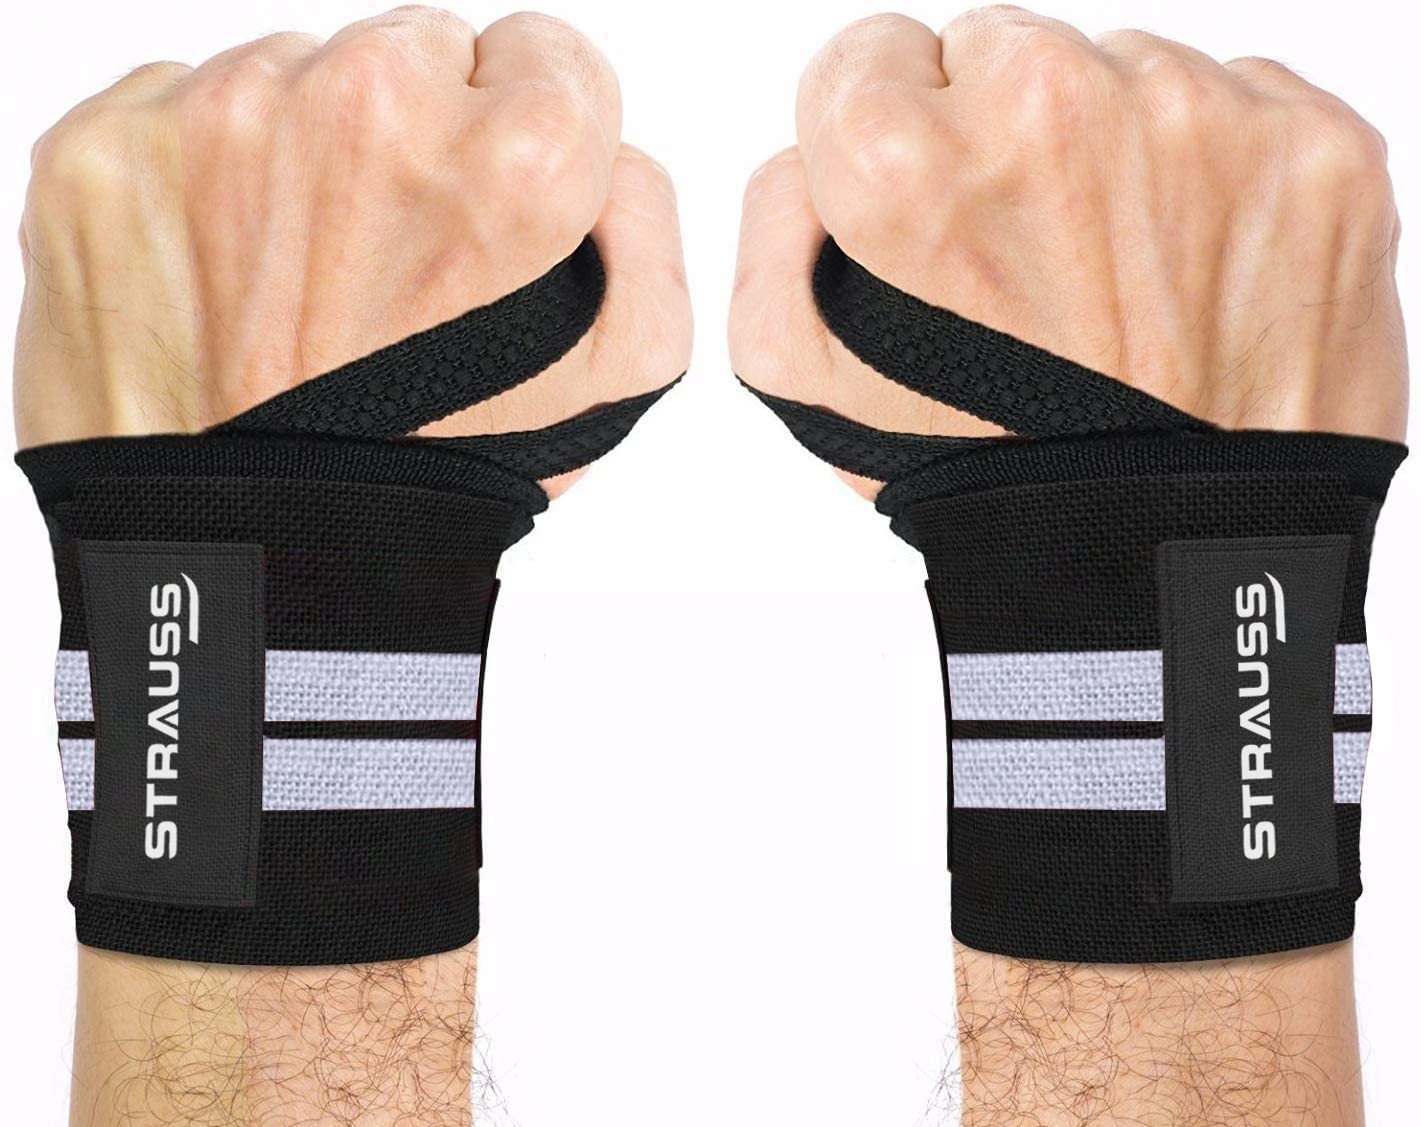 STRAUSS WL Cotton Wrist Supporter with Thumb Loop Straps & Closures for Gym, Workouts & Strength Training| Adjustable & Breathable with Powerful Velcro & Soft Material,(Black/White)